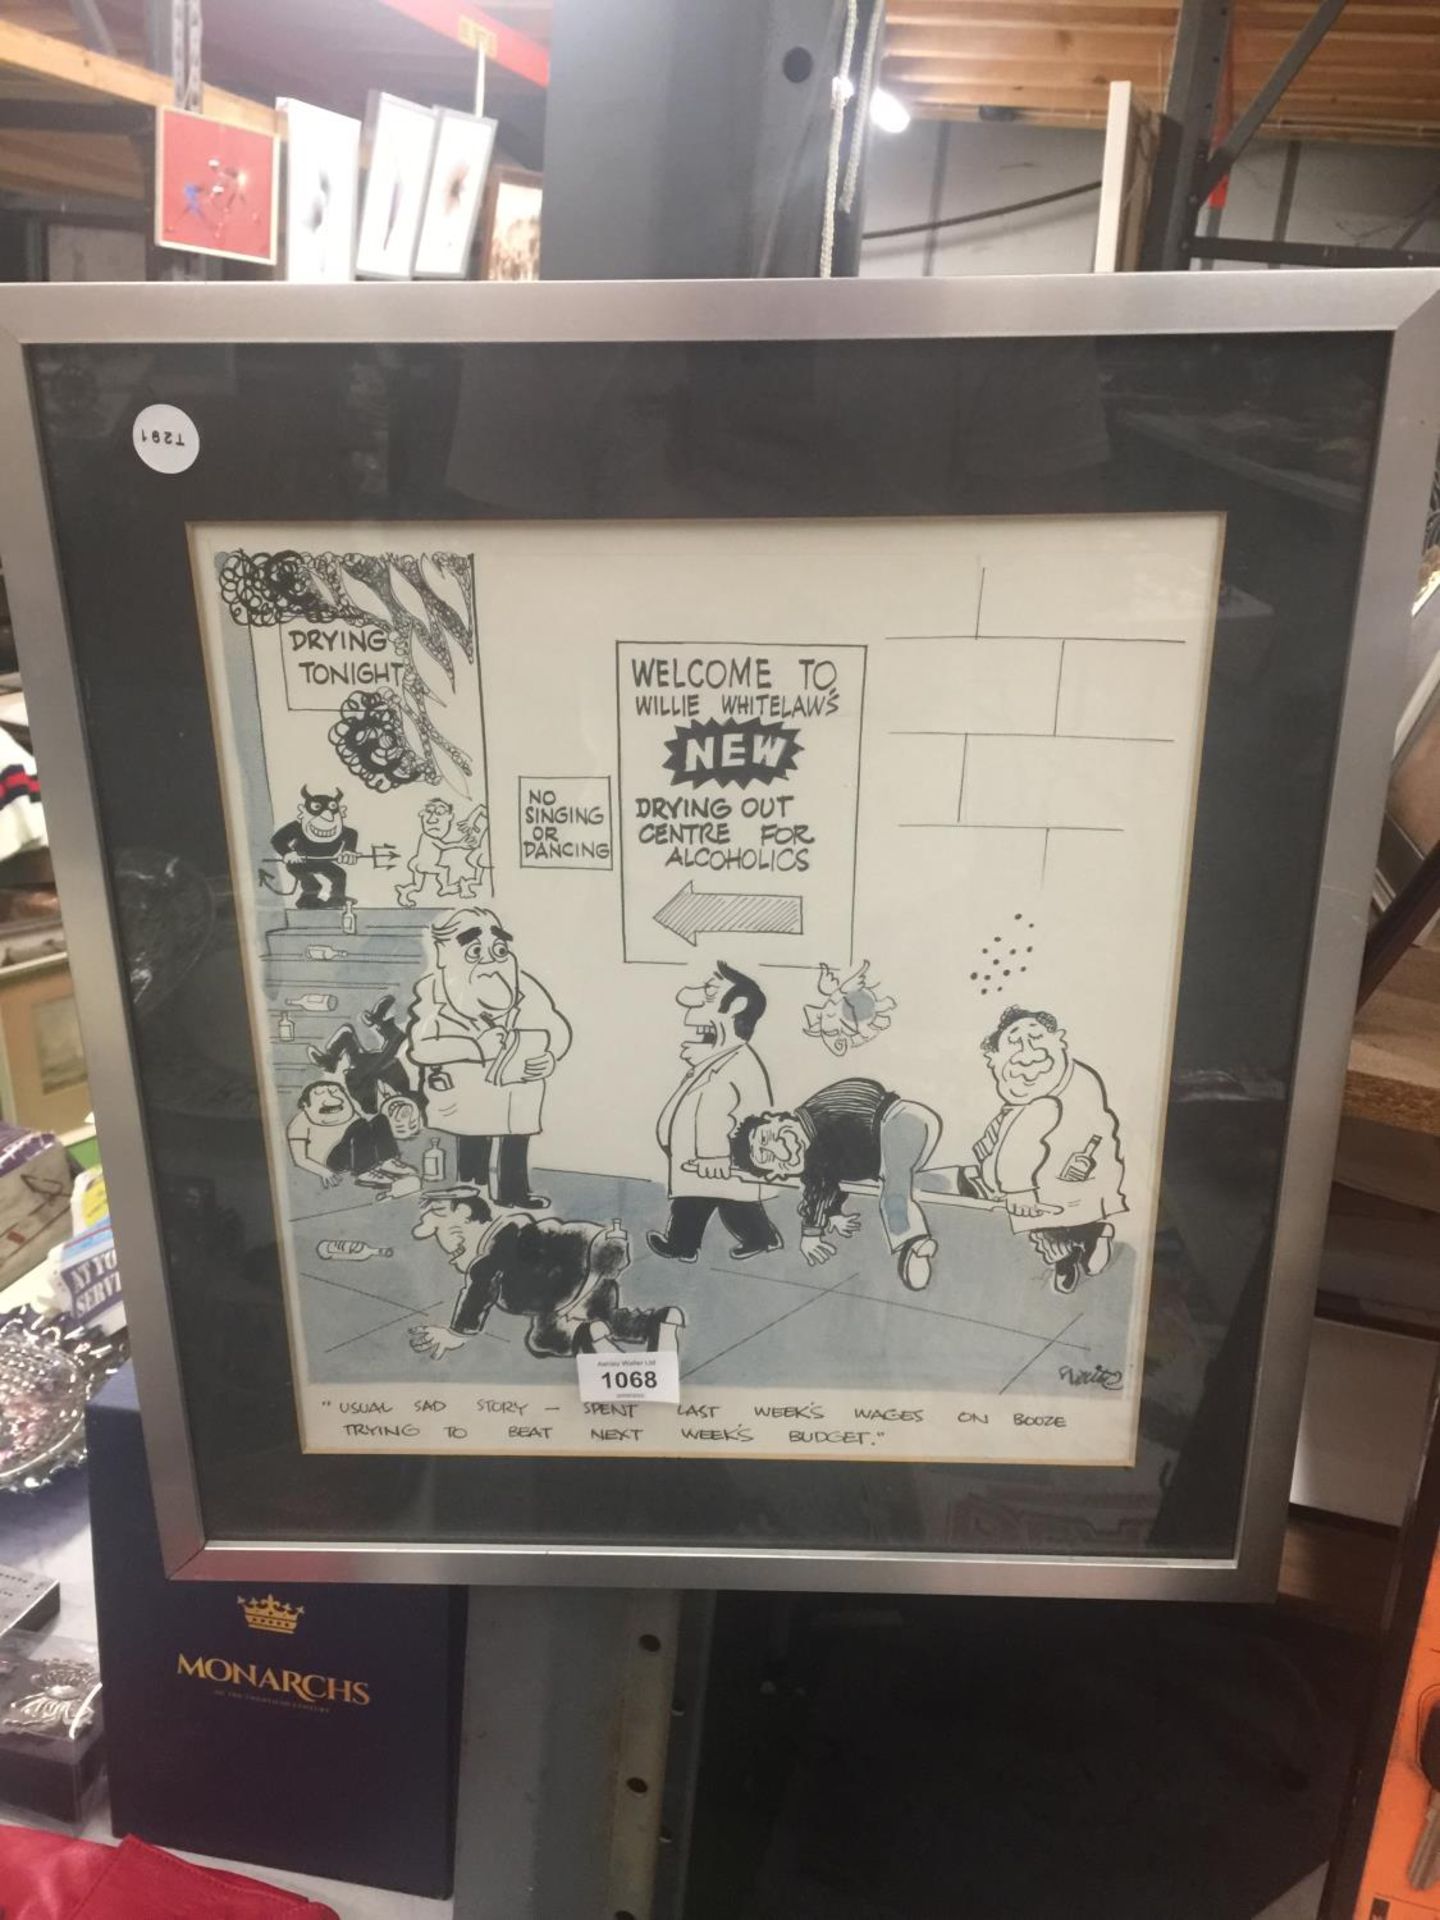 A FRAMED CARTOON CAPTION ABOUT WILLIE WHITELAW